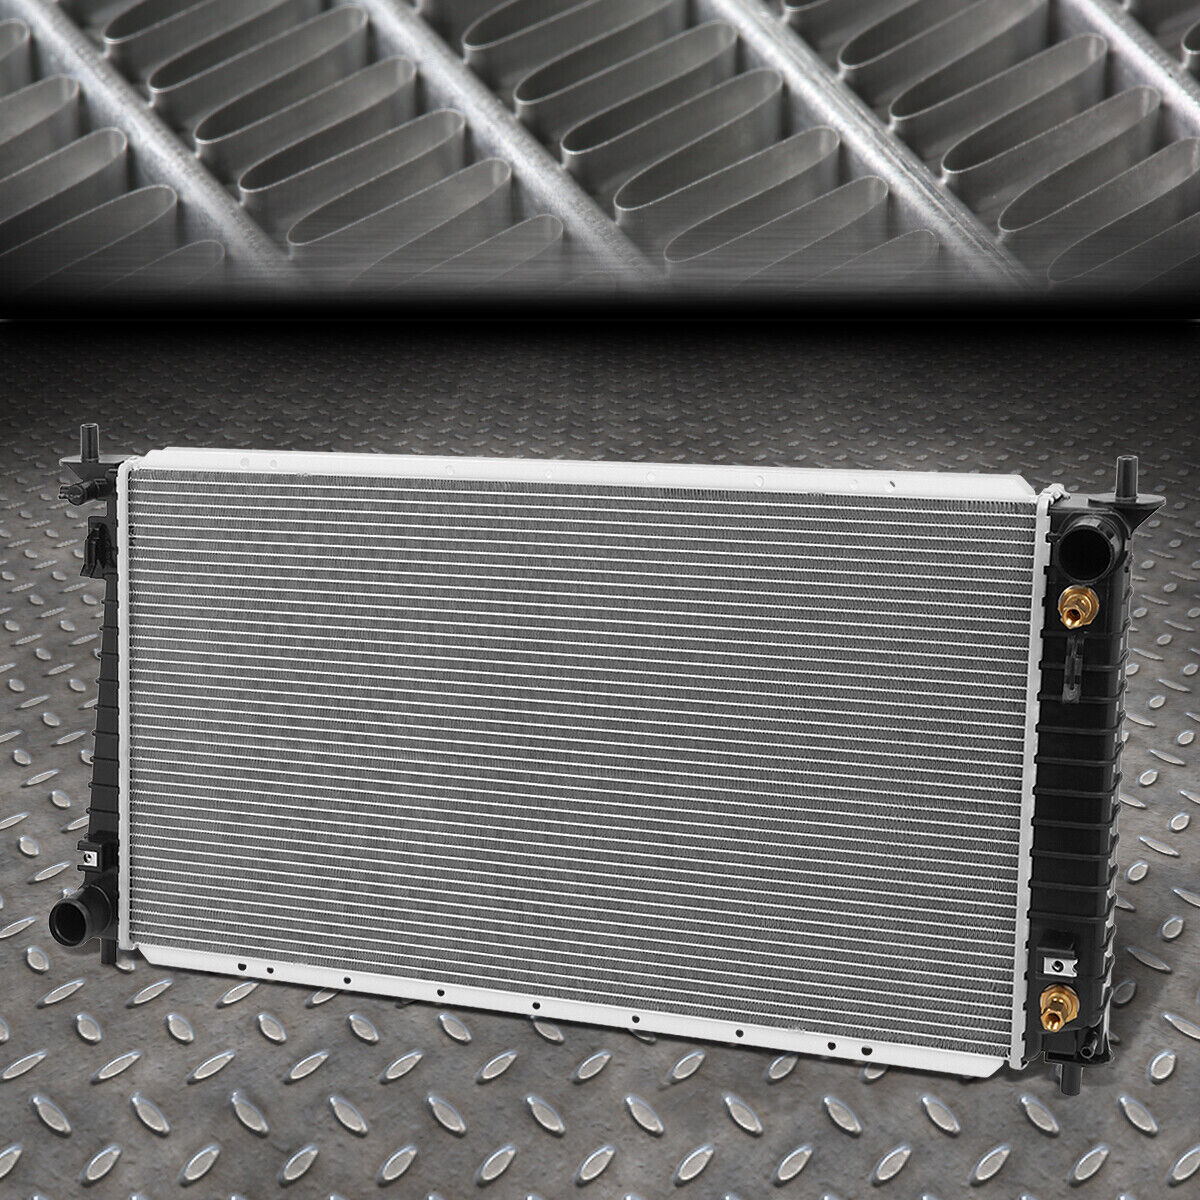 FOR 97-98 F150 F250 EXPEDITION 4.2L 4.6L AT OE STYLE ALUMINUM RADIATOR DPI 2141